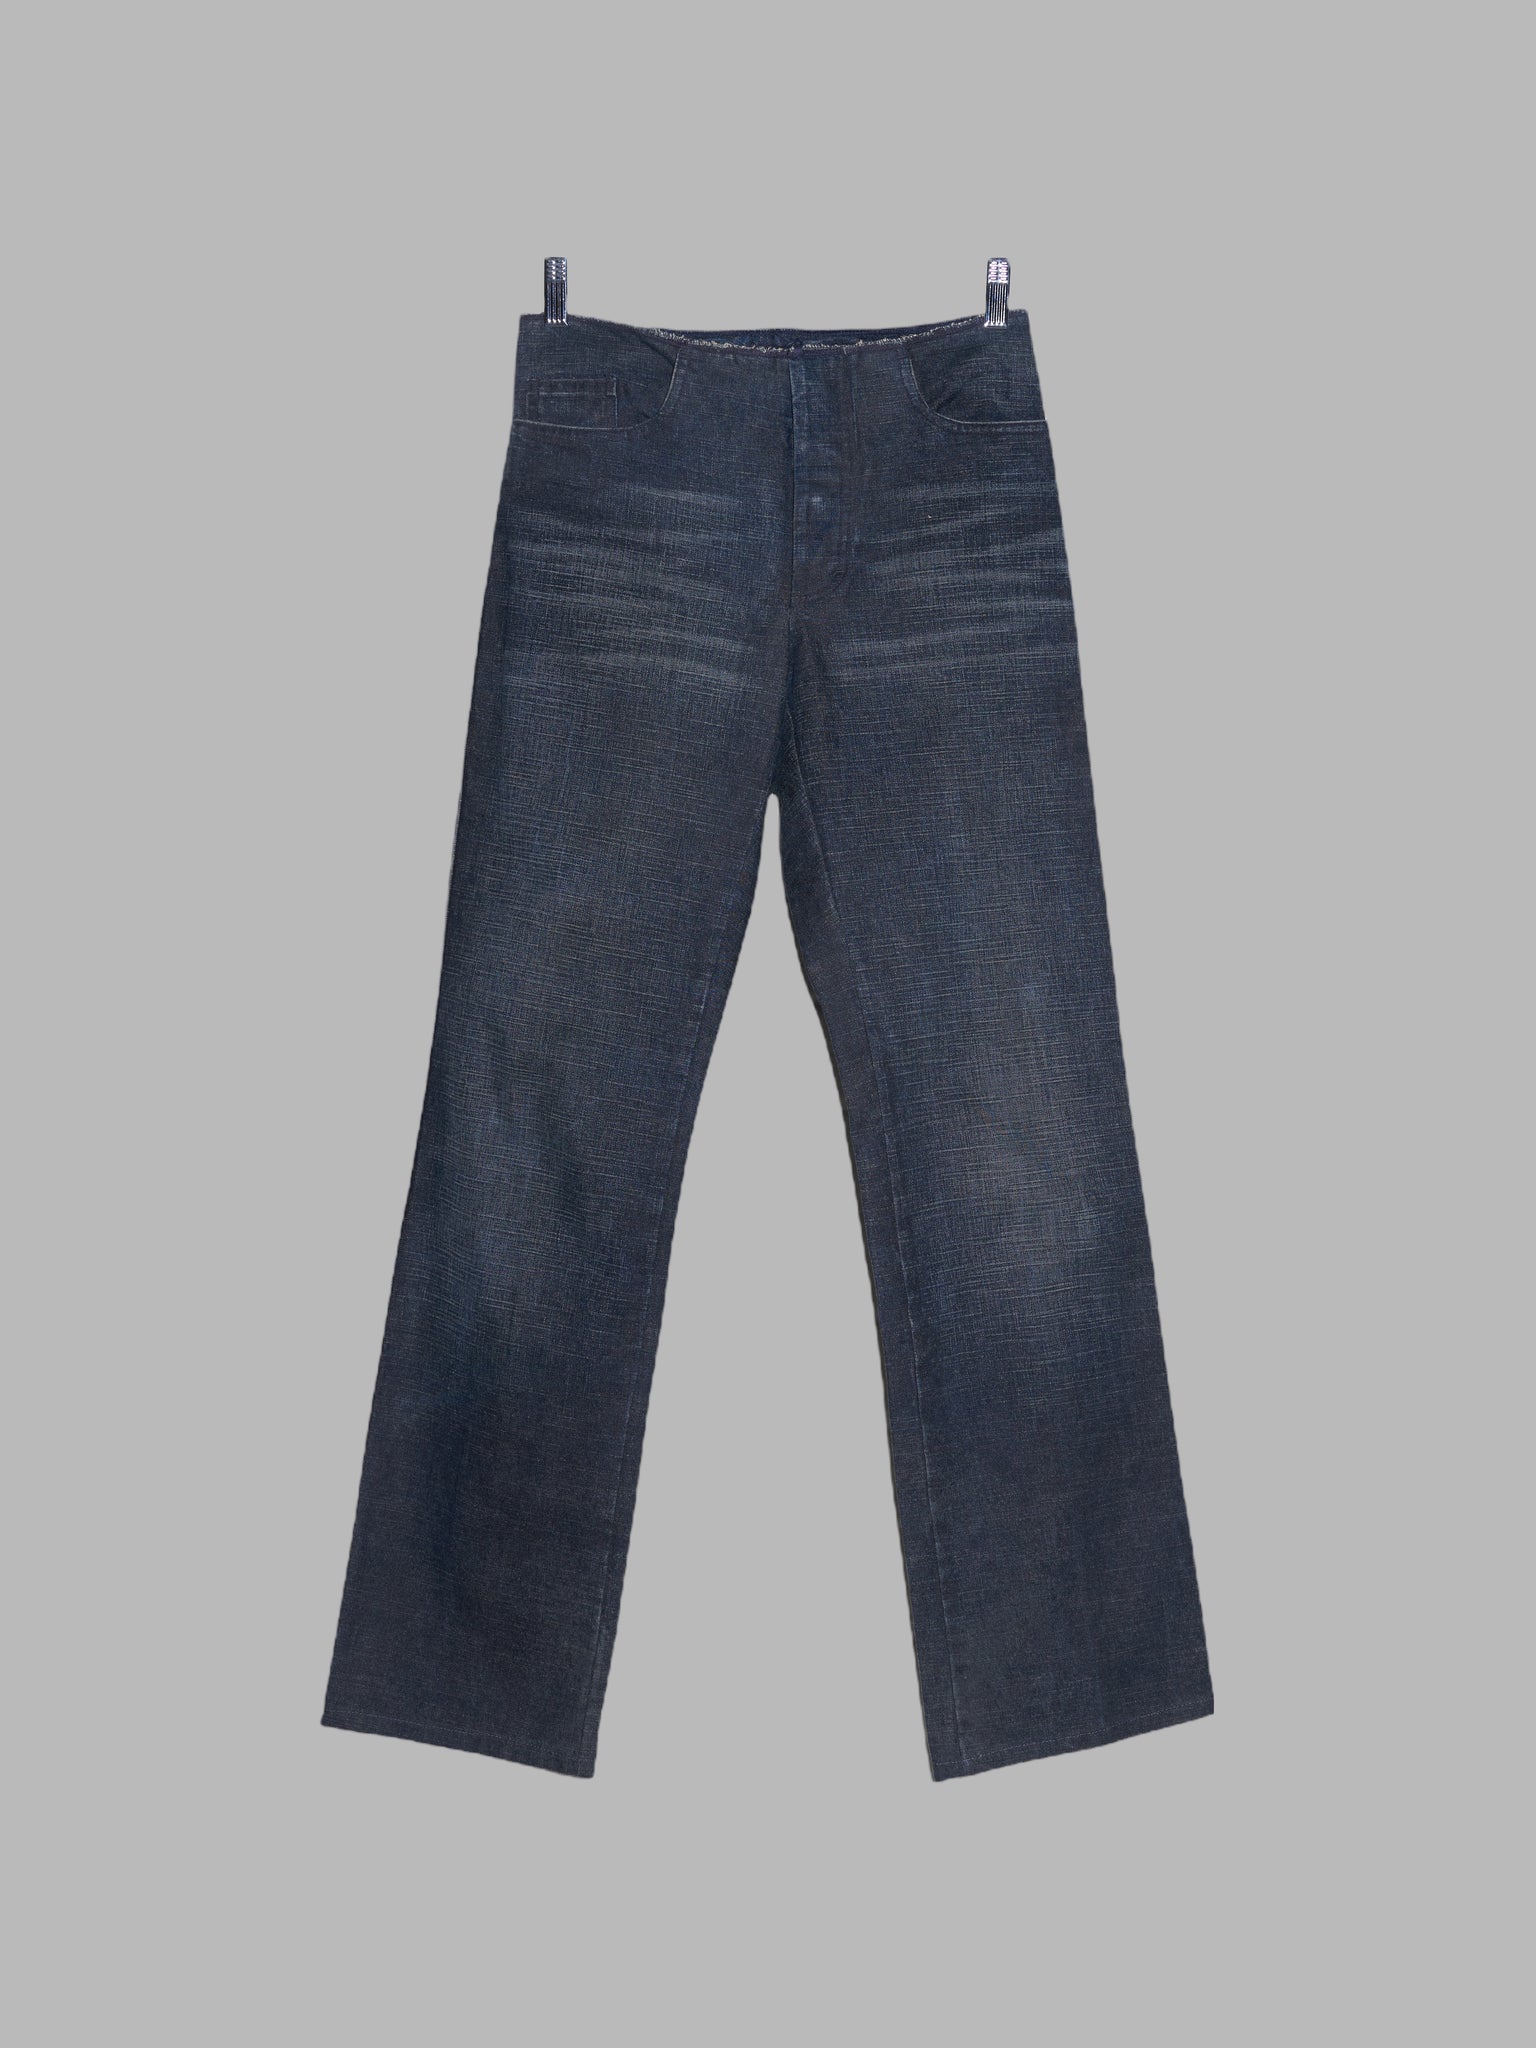 Jean Colonna 'worn' blue coated jeans with cutoff waist - size 44